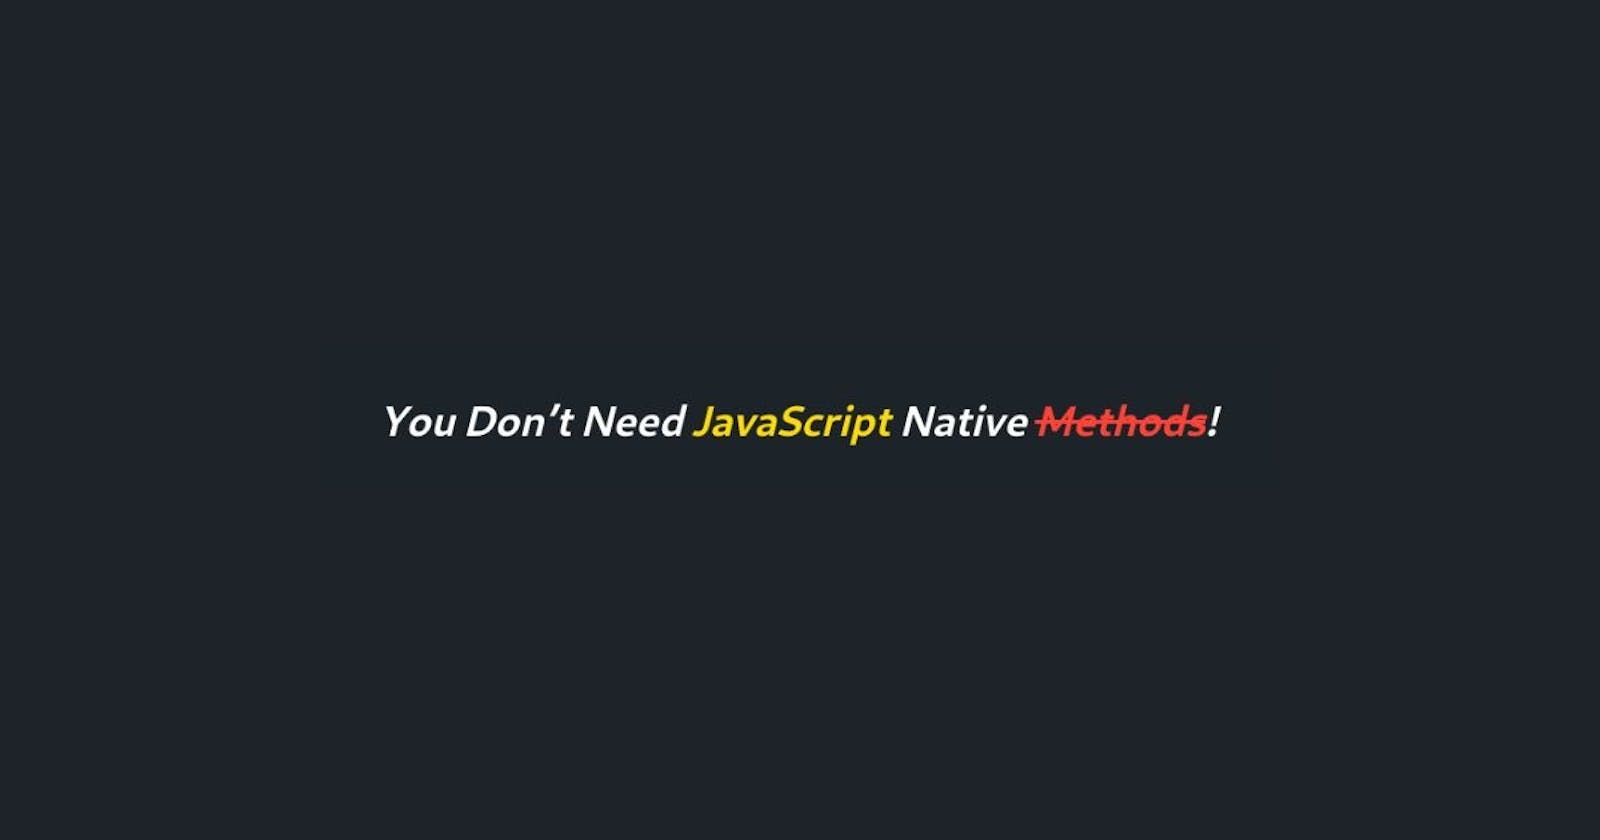 You Don’t Need JavaScript Native Methods